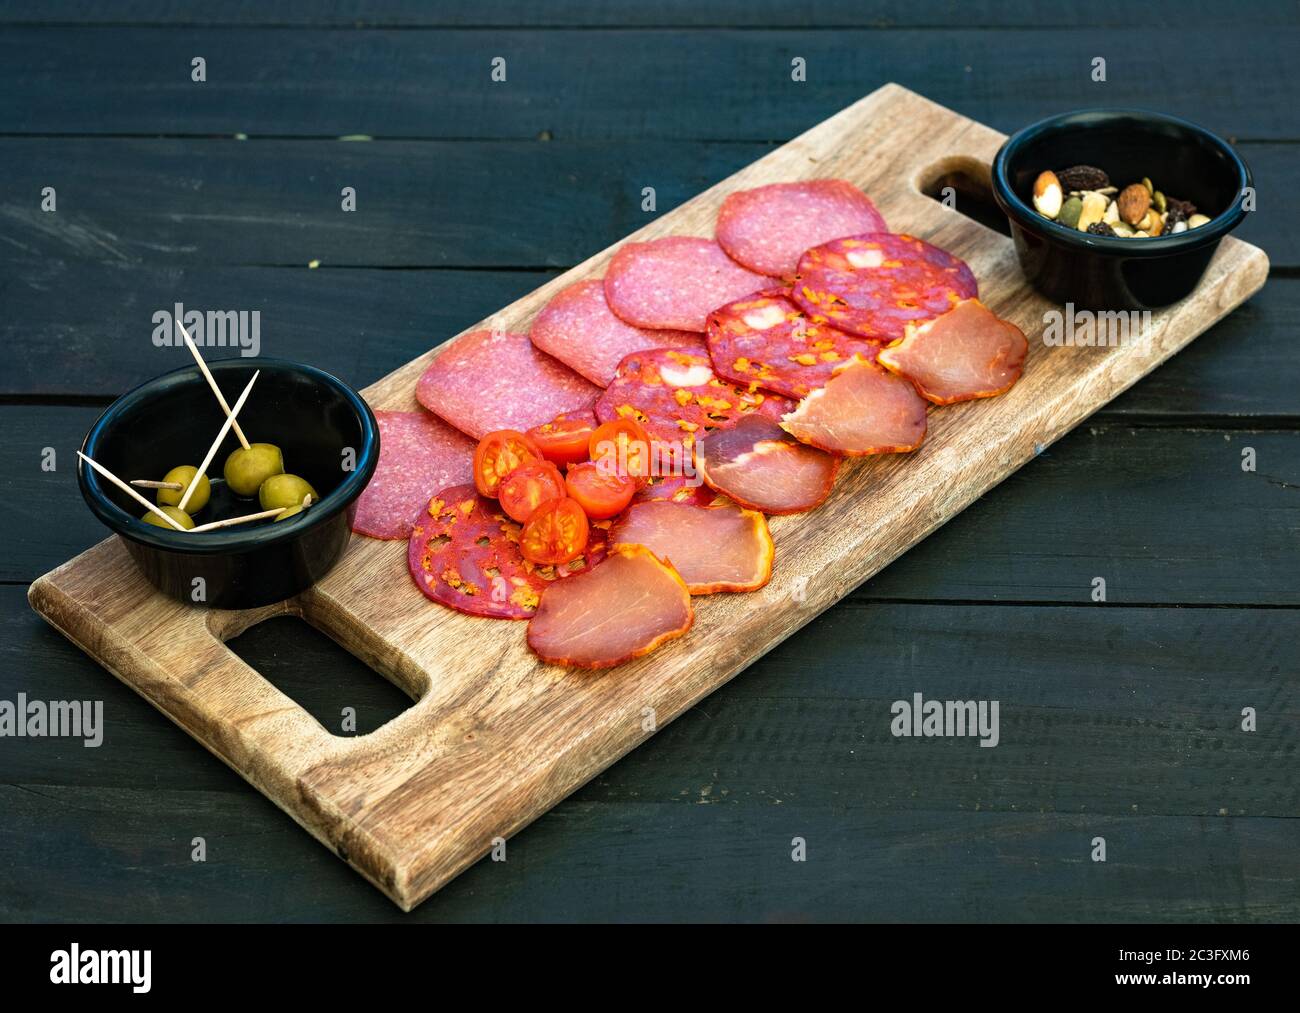 Cured meat platter. Chorizo, salami, ham, olives on a wooden board. Stock Photo